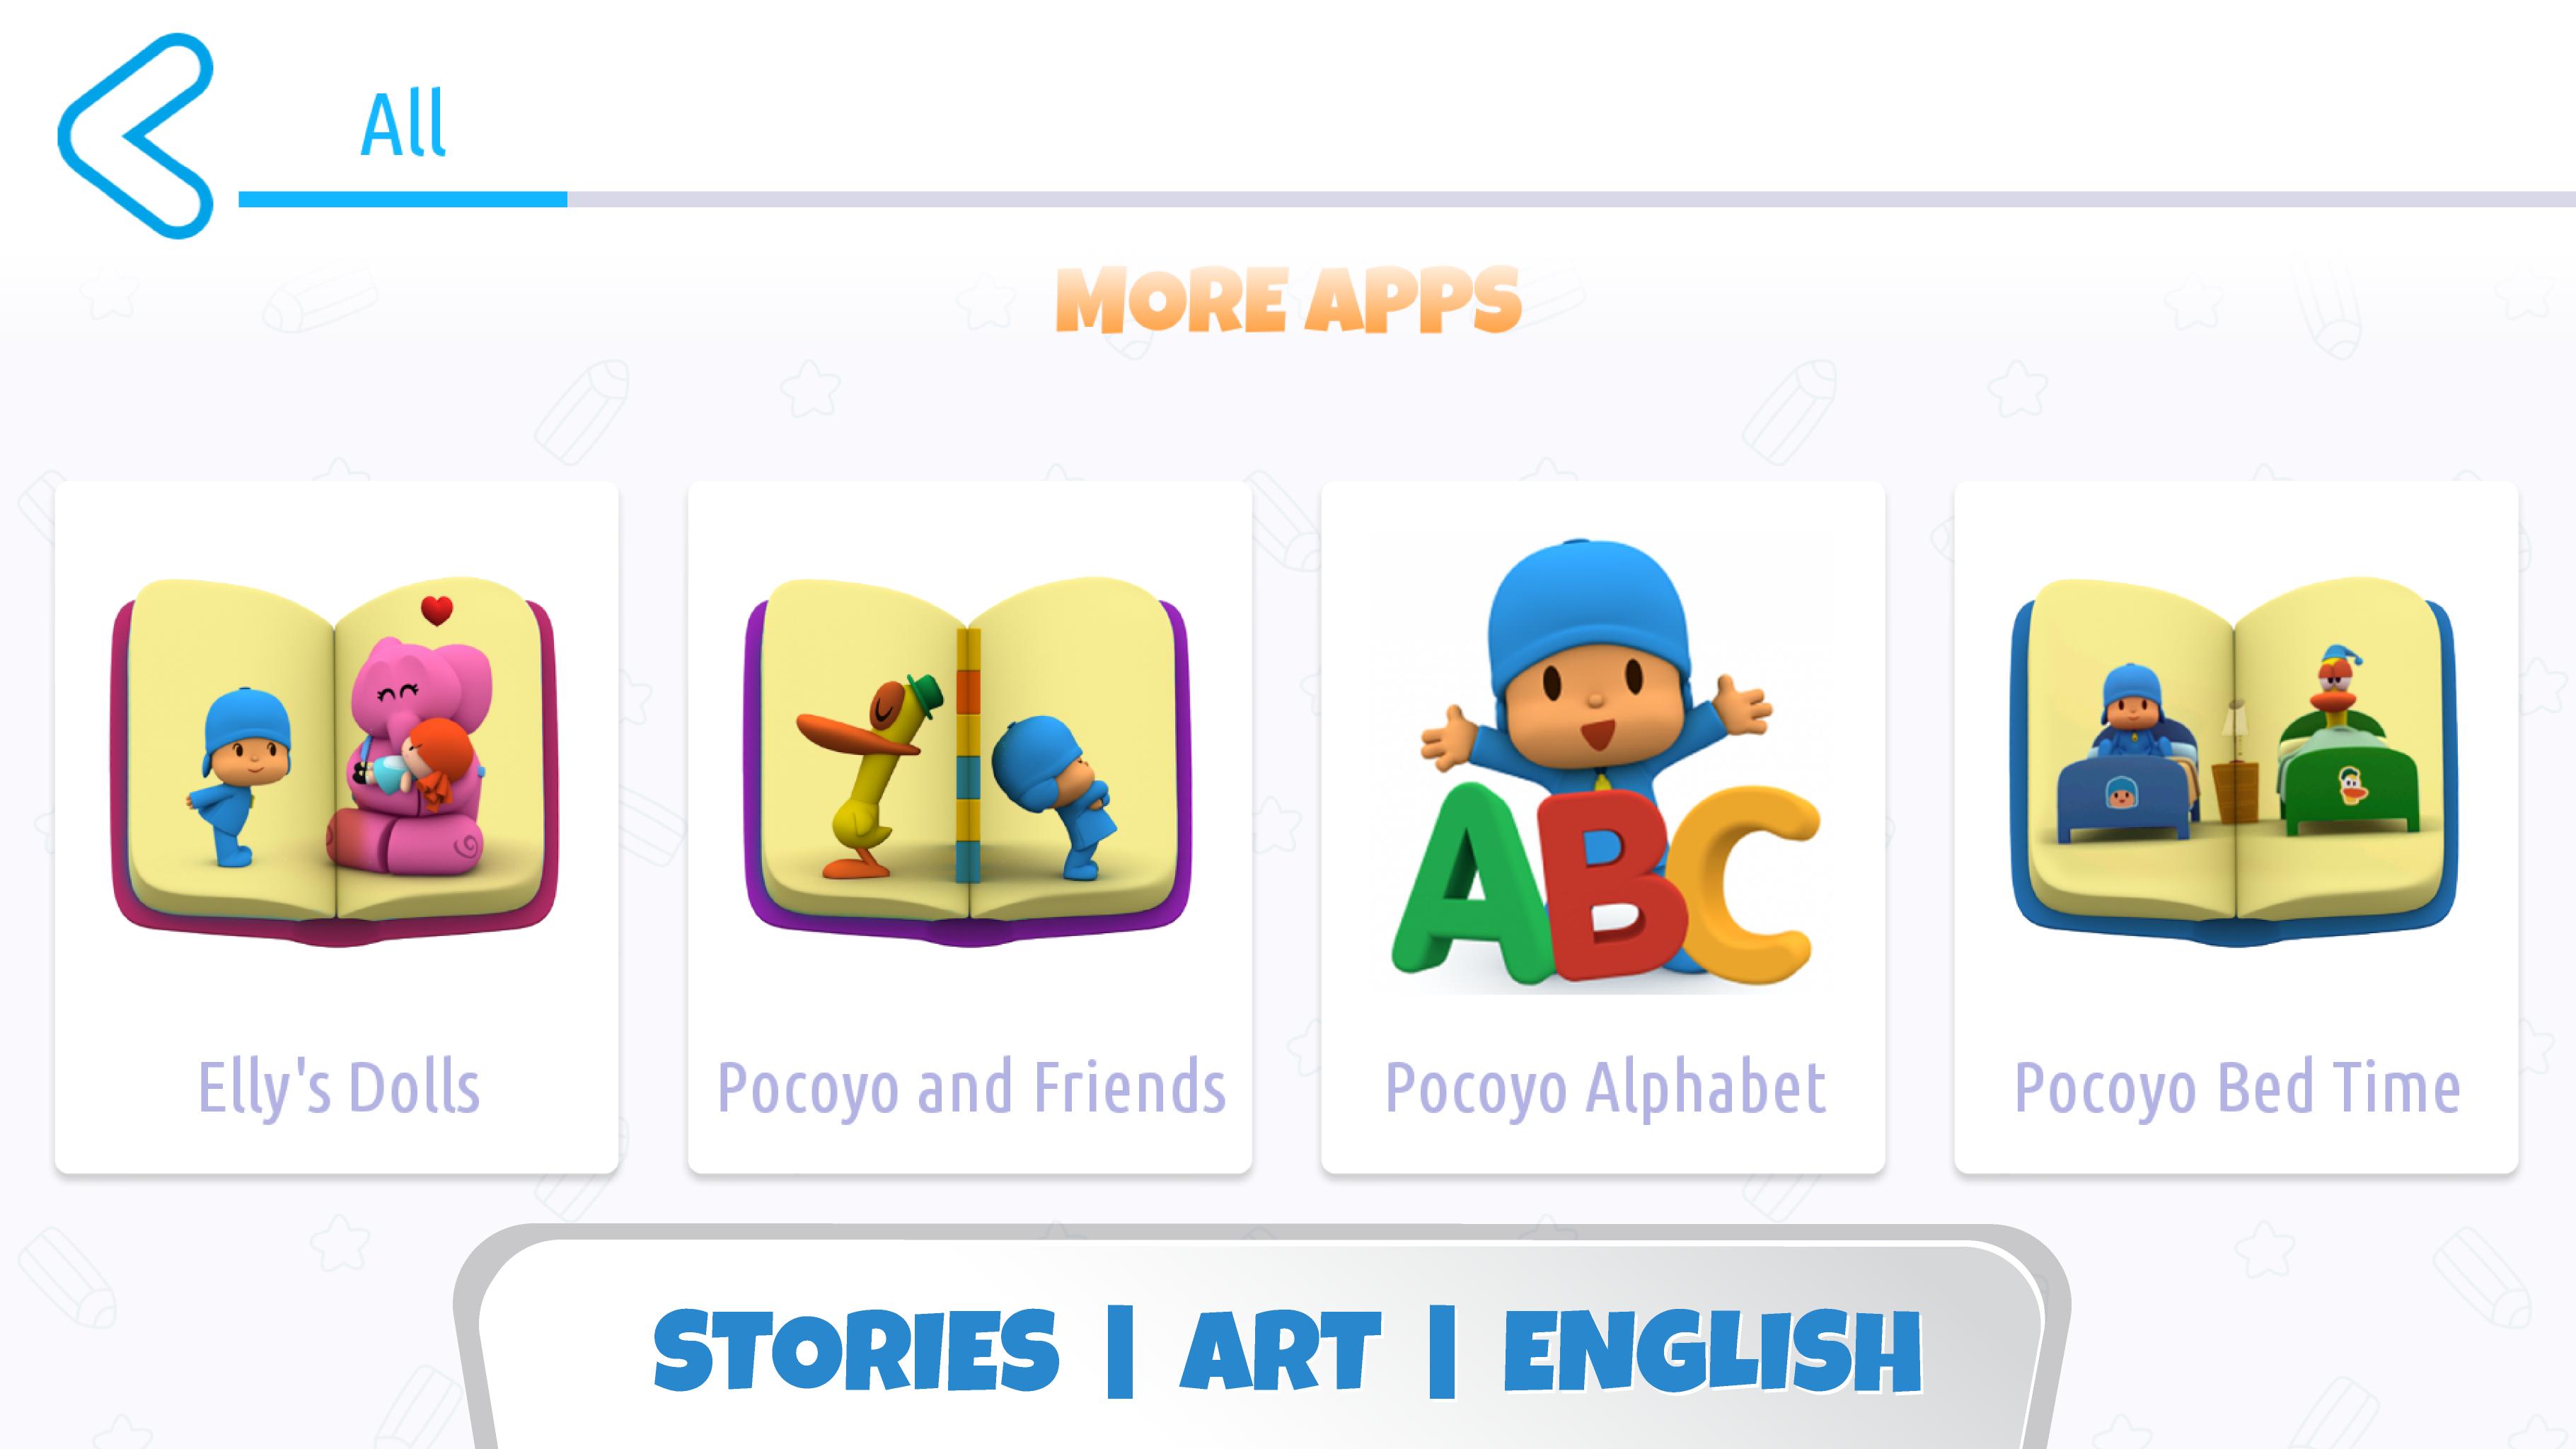 Pocoyo House best videos and apps for kids 3.1.3 Screenshot 16